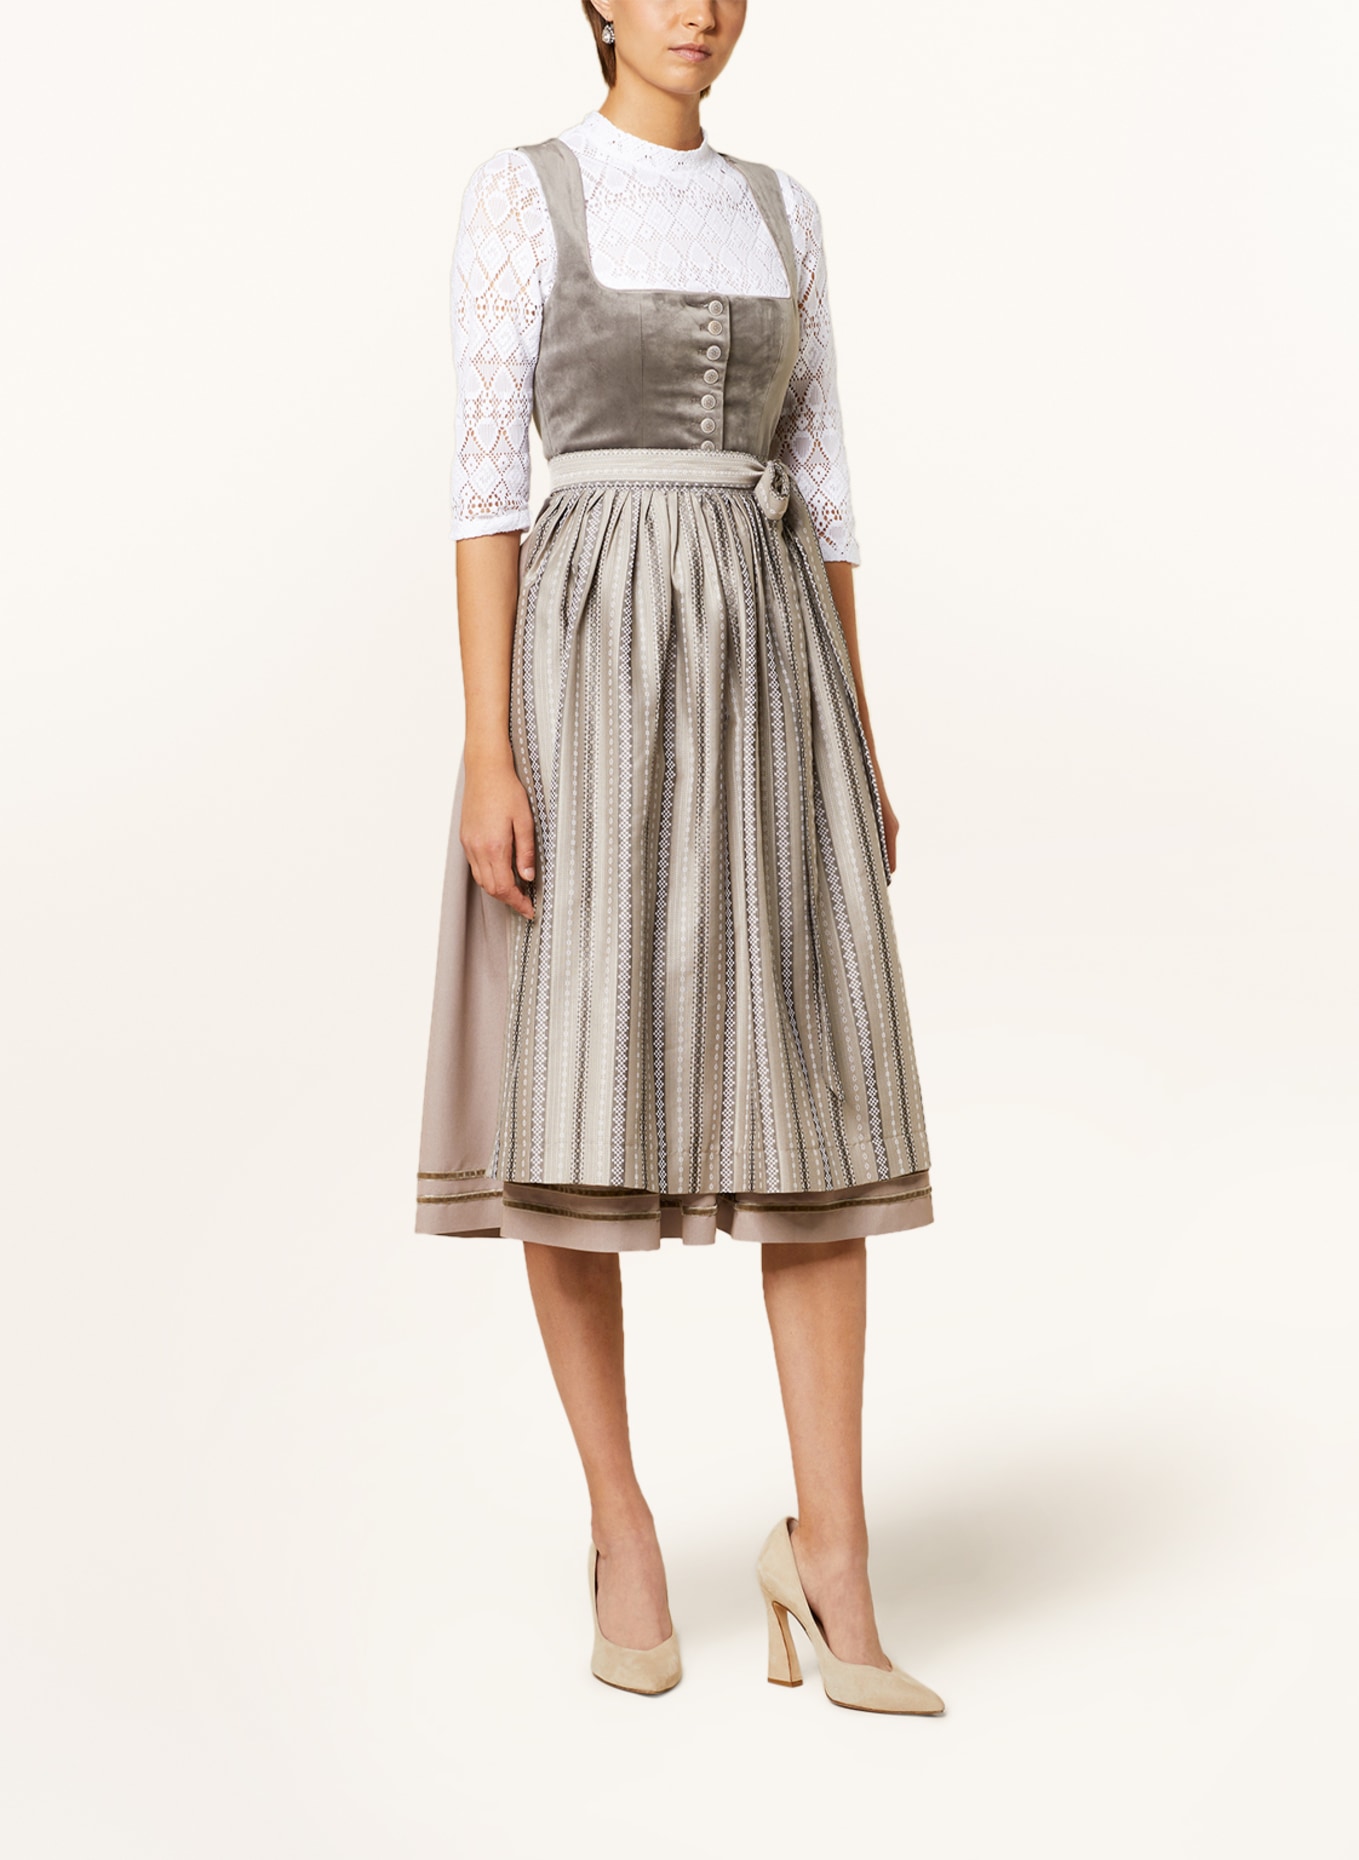 WALDORFF Dirndl blouse made of lace, Color: WHITE (Image 4)